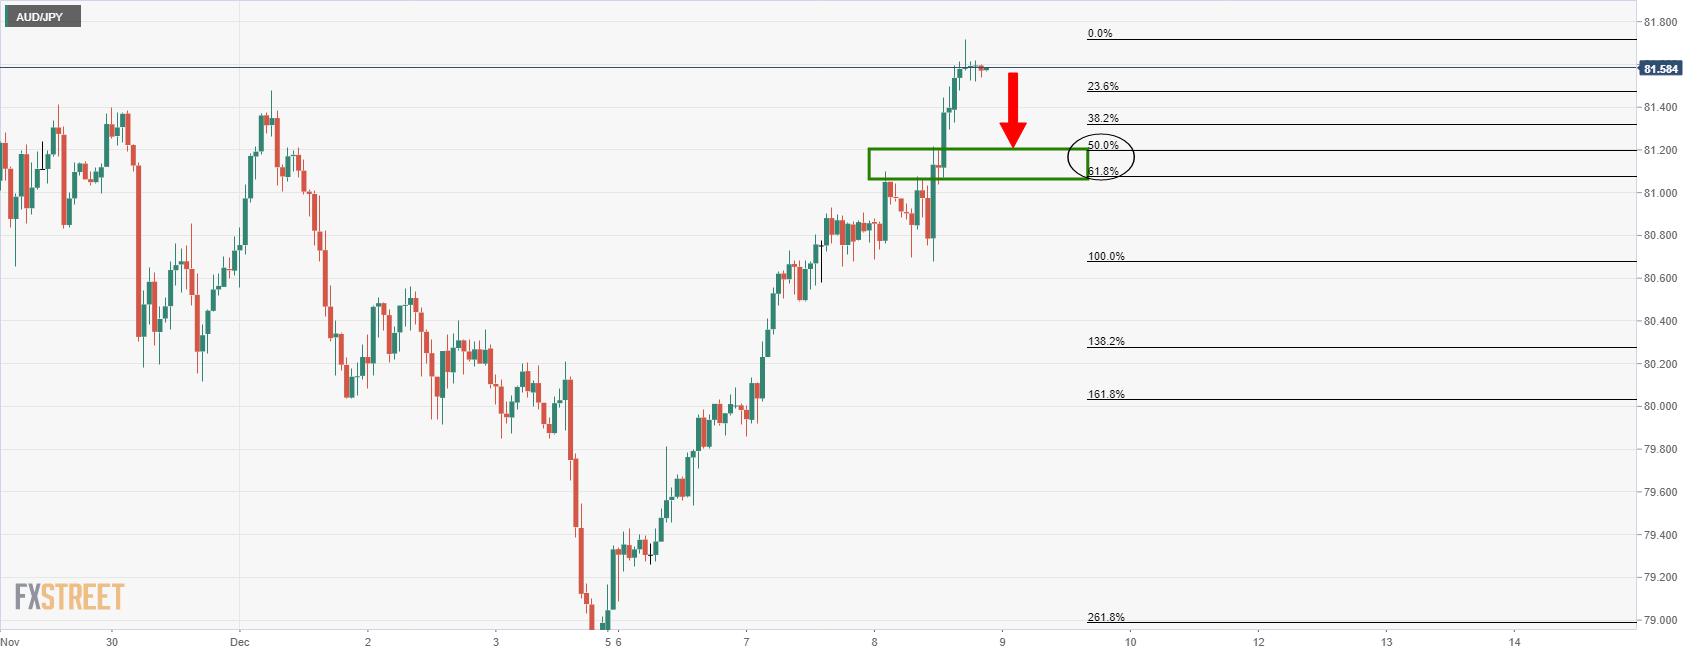 AUD/JPY Price Analysis: W-formation spotted on daily chart